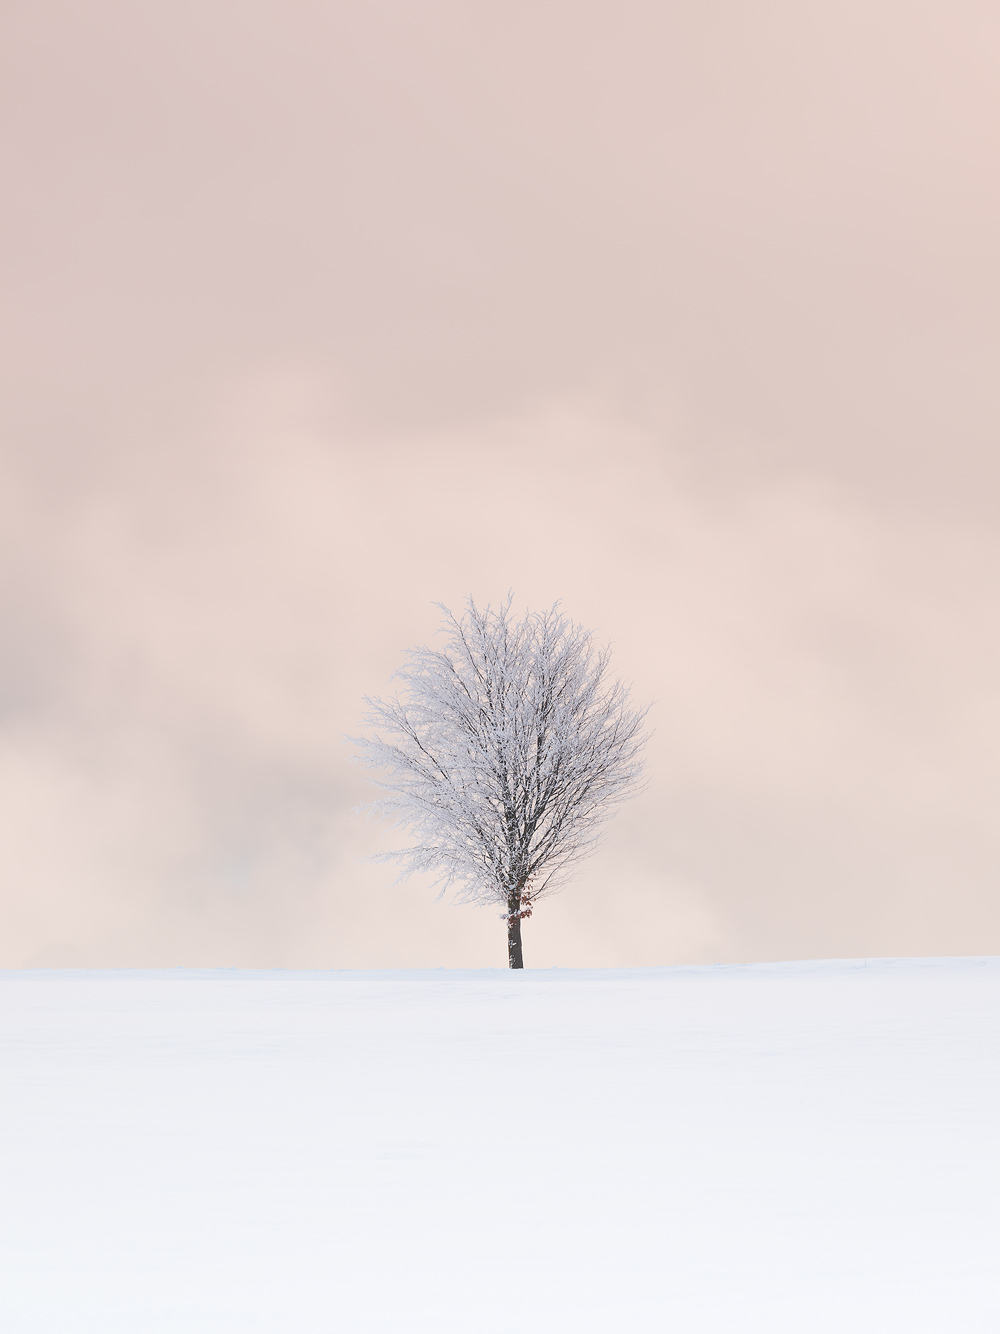 Lone Tree, Ore Mountains, Germany by Nils Leonhardt